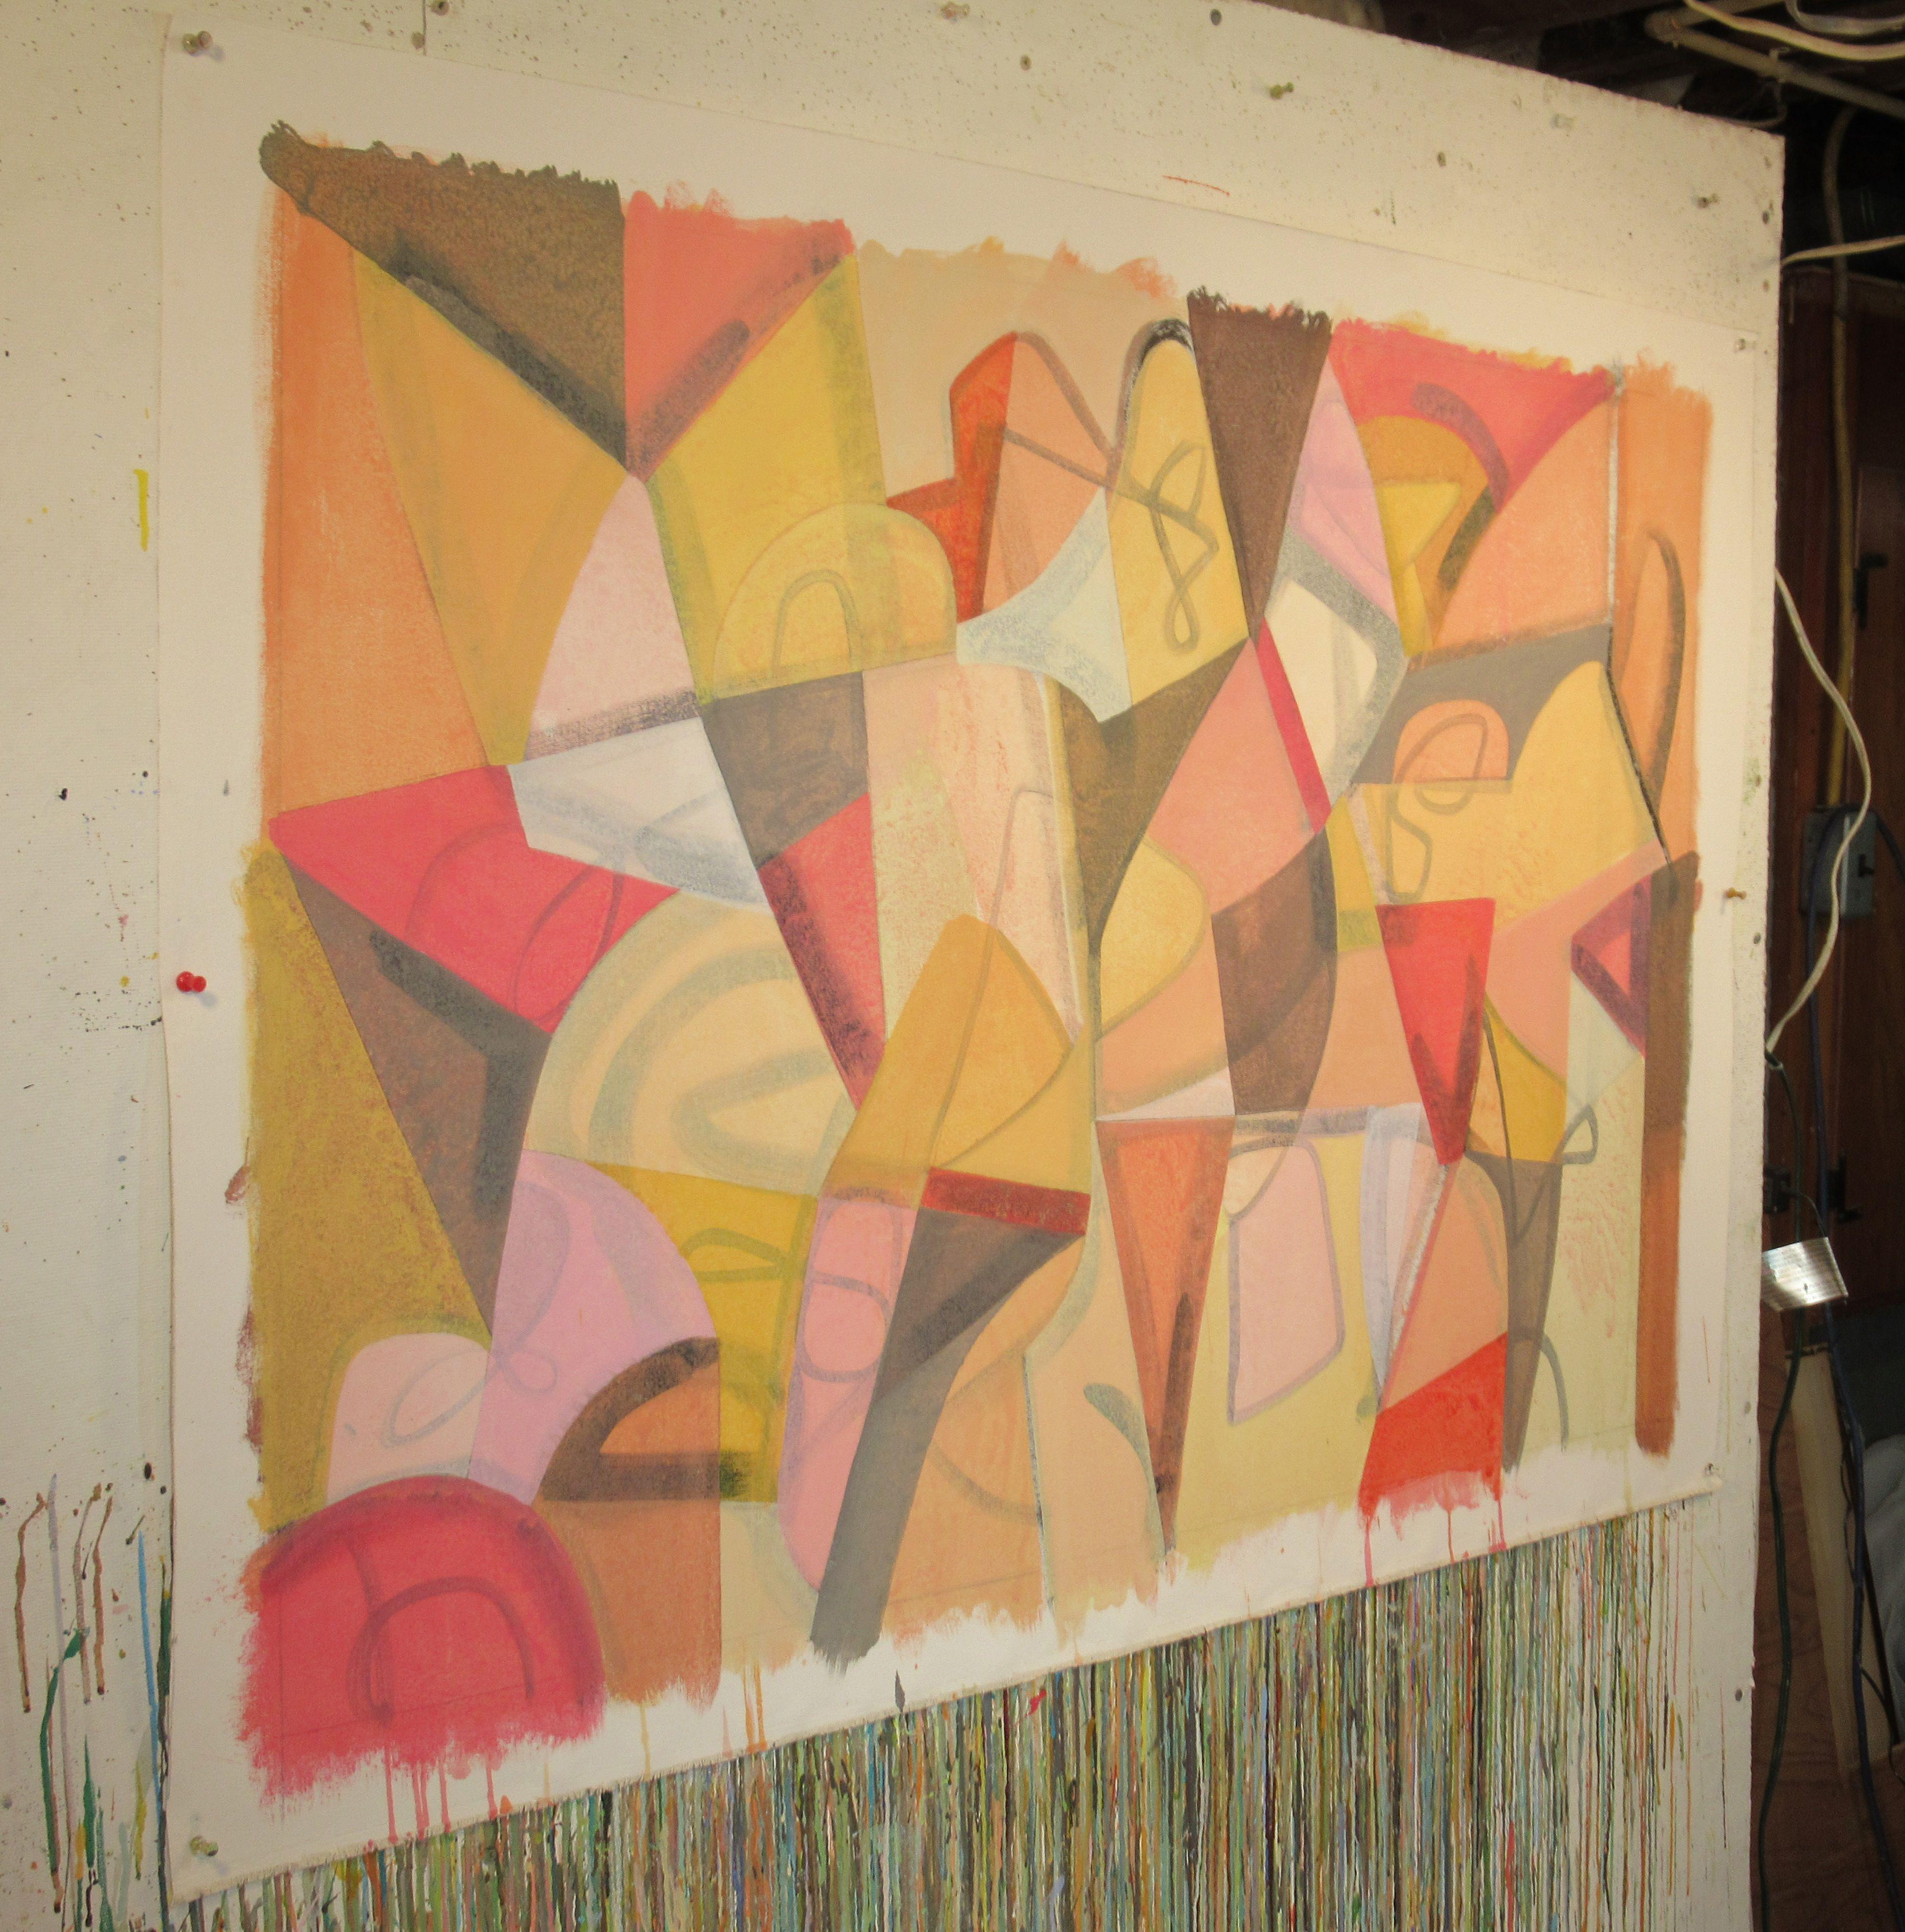 A lively composition of reds, yellows, grays and off whites combining a spontaneous underpainting with a more rigid structure of simple geometric shapes on top. Interesting juxtapositions between the loose and the straight edged. Textures energize